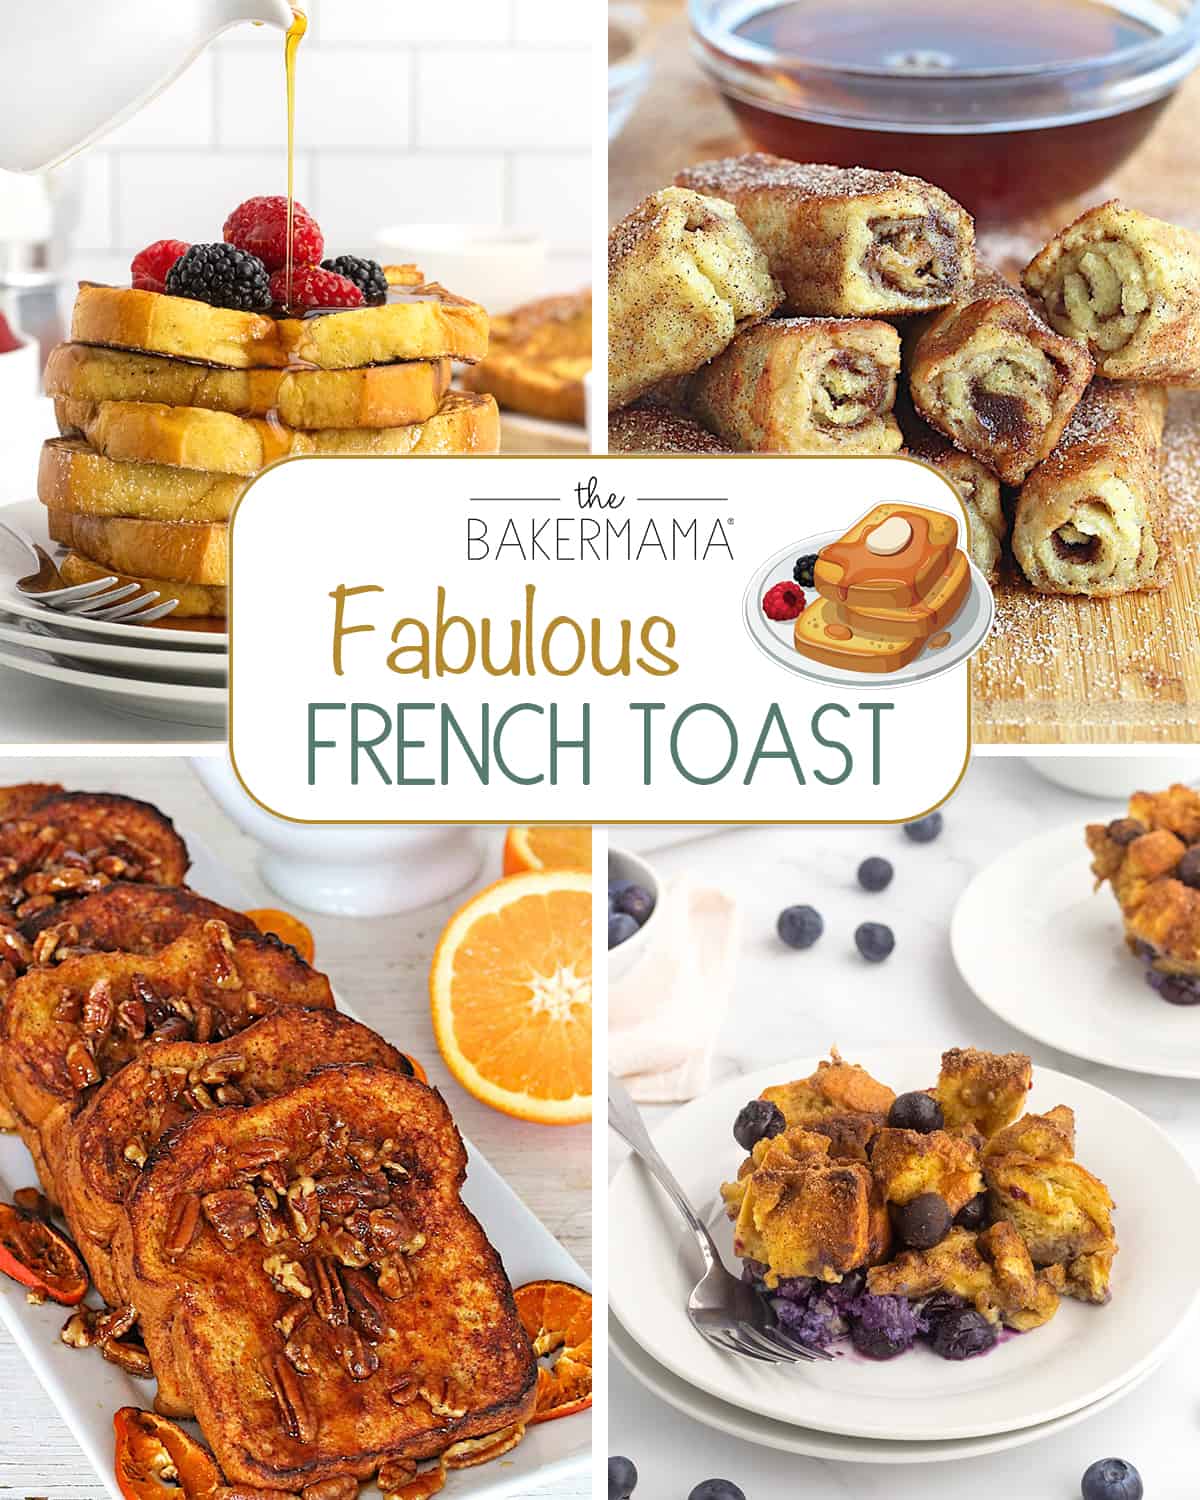 Fabulous French Toast Recipes by The BakerMama